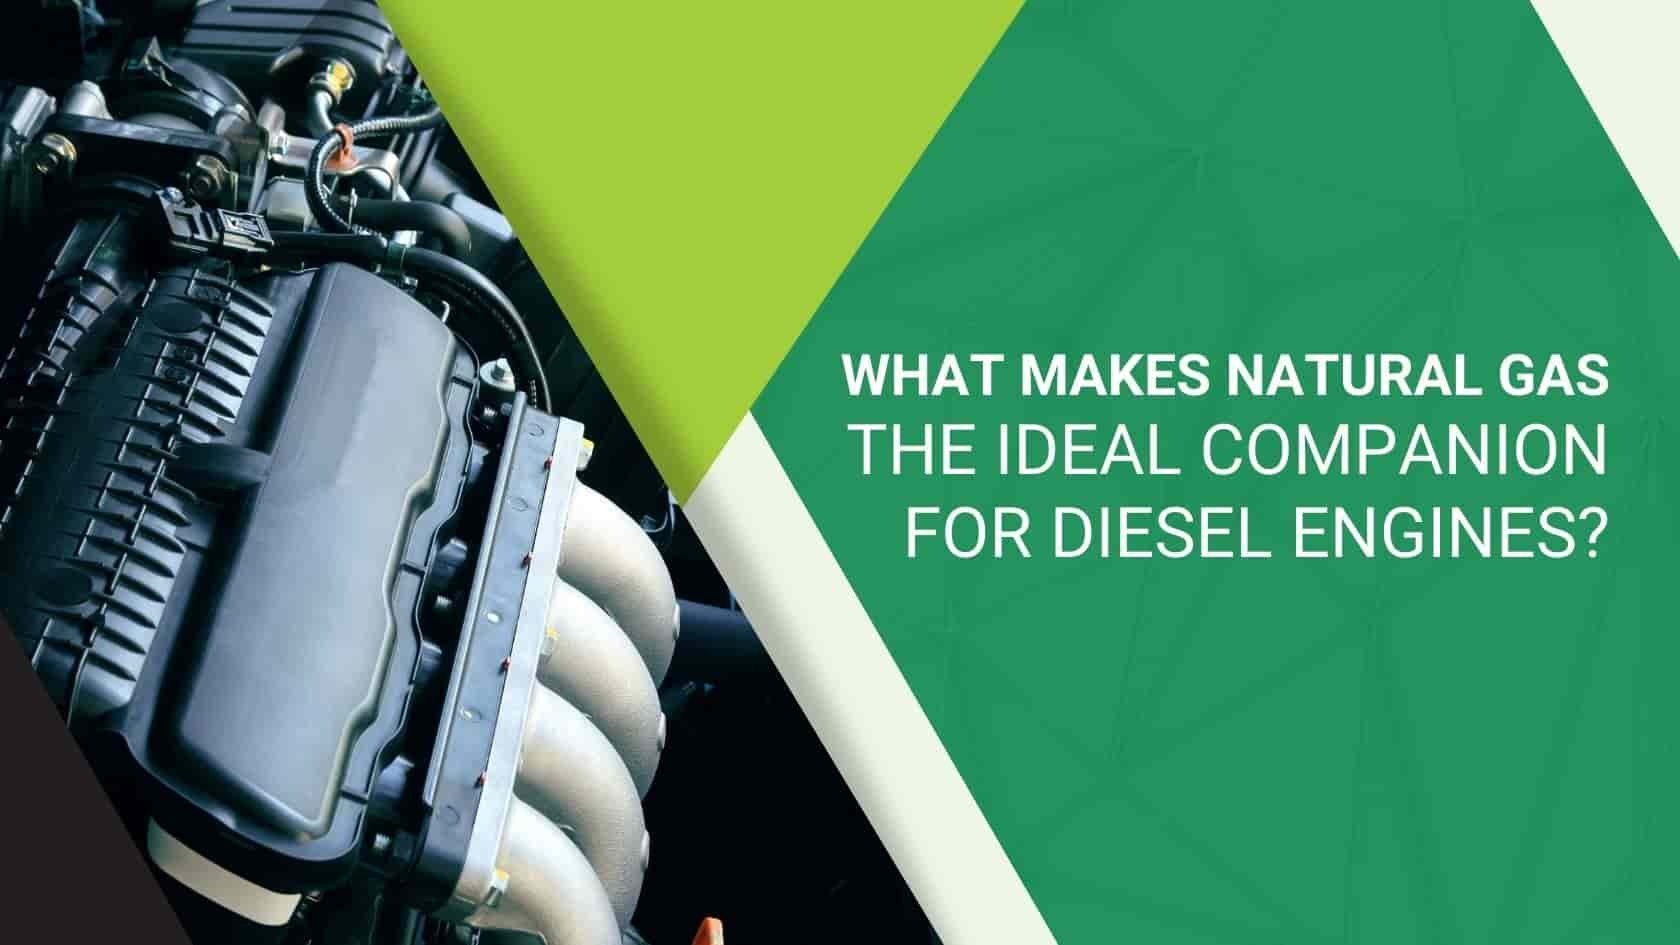 What Makes Natural Gas The Ideal Companion For Diesel Engines